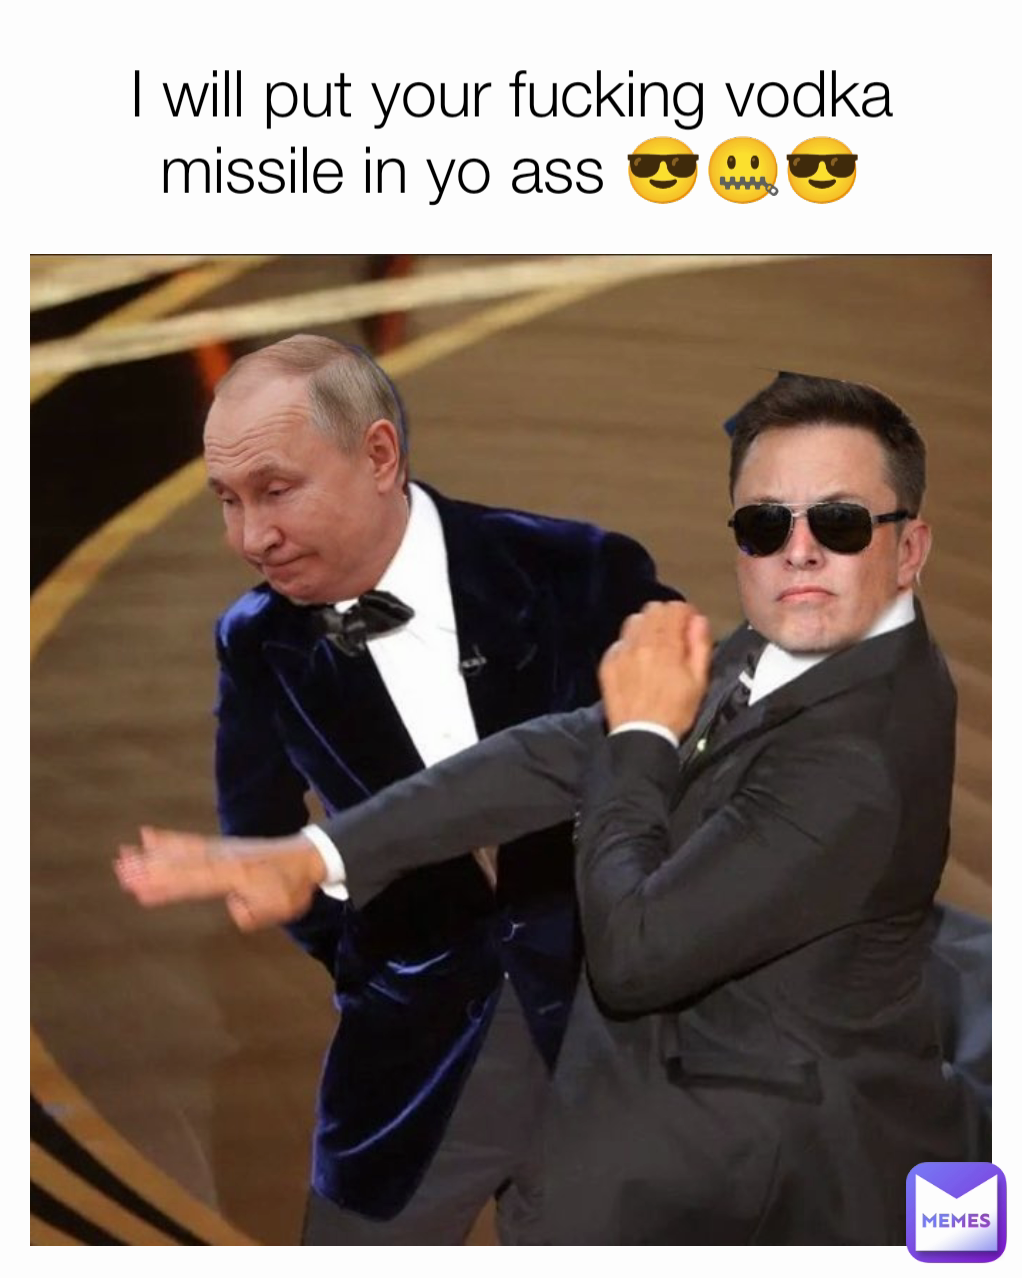 I will put your fucking vodka missile in yo ass 😎🤐😎